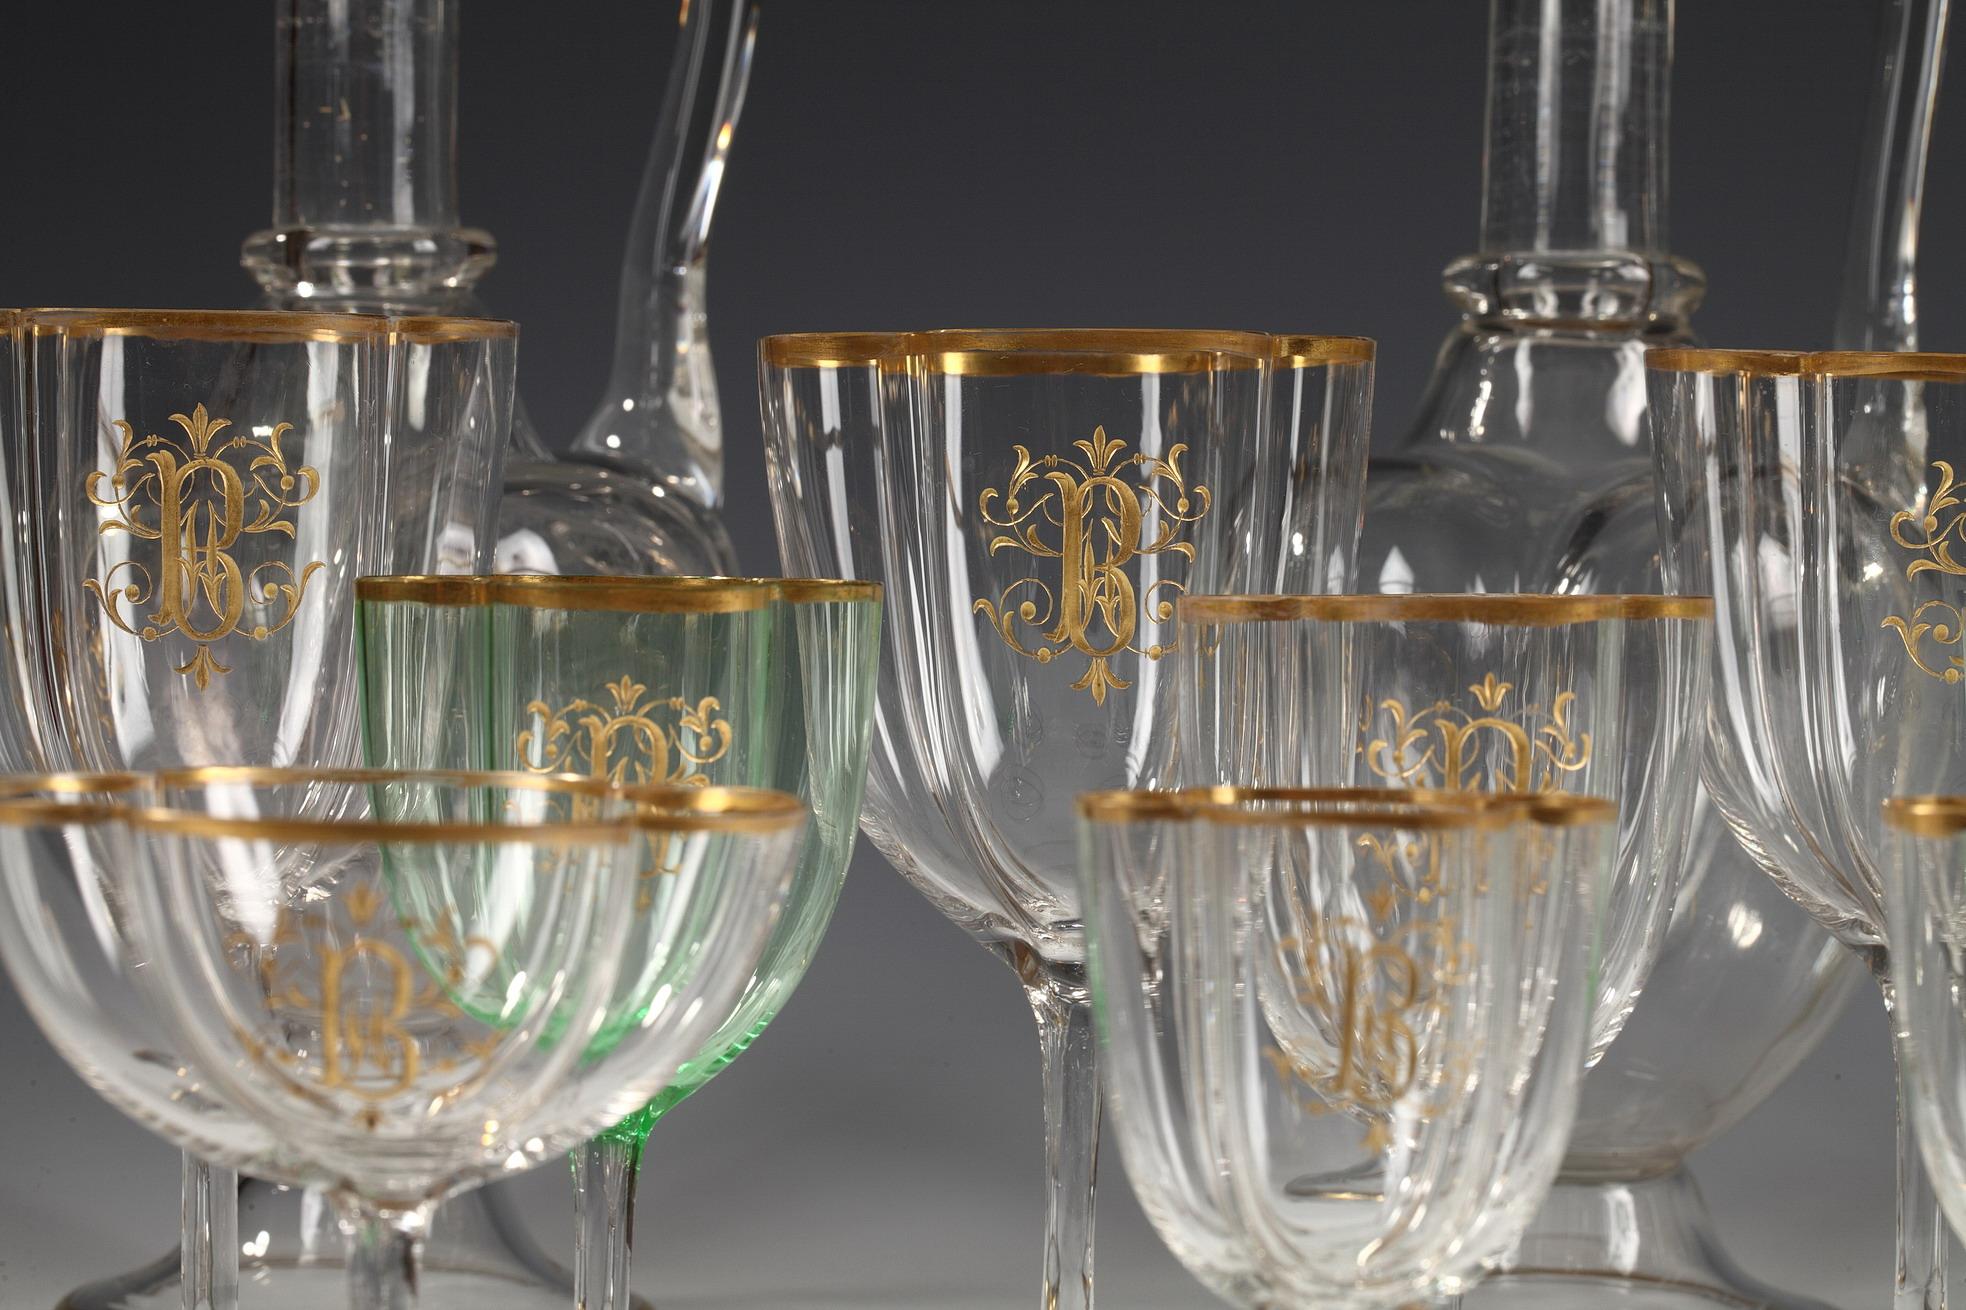 Cypher “B” set of 112 pieces. 

Glasses table set attributed to the crystal manufacture of Baccarat, composed by eighteen Champagne cups, twenty-two water glasses, twenty-two red wine glasses, twenty-two green-colored white wine glasses, eighteen